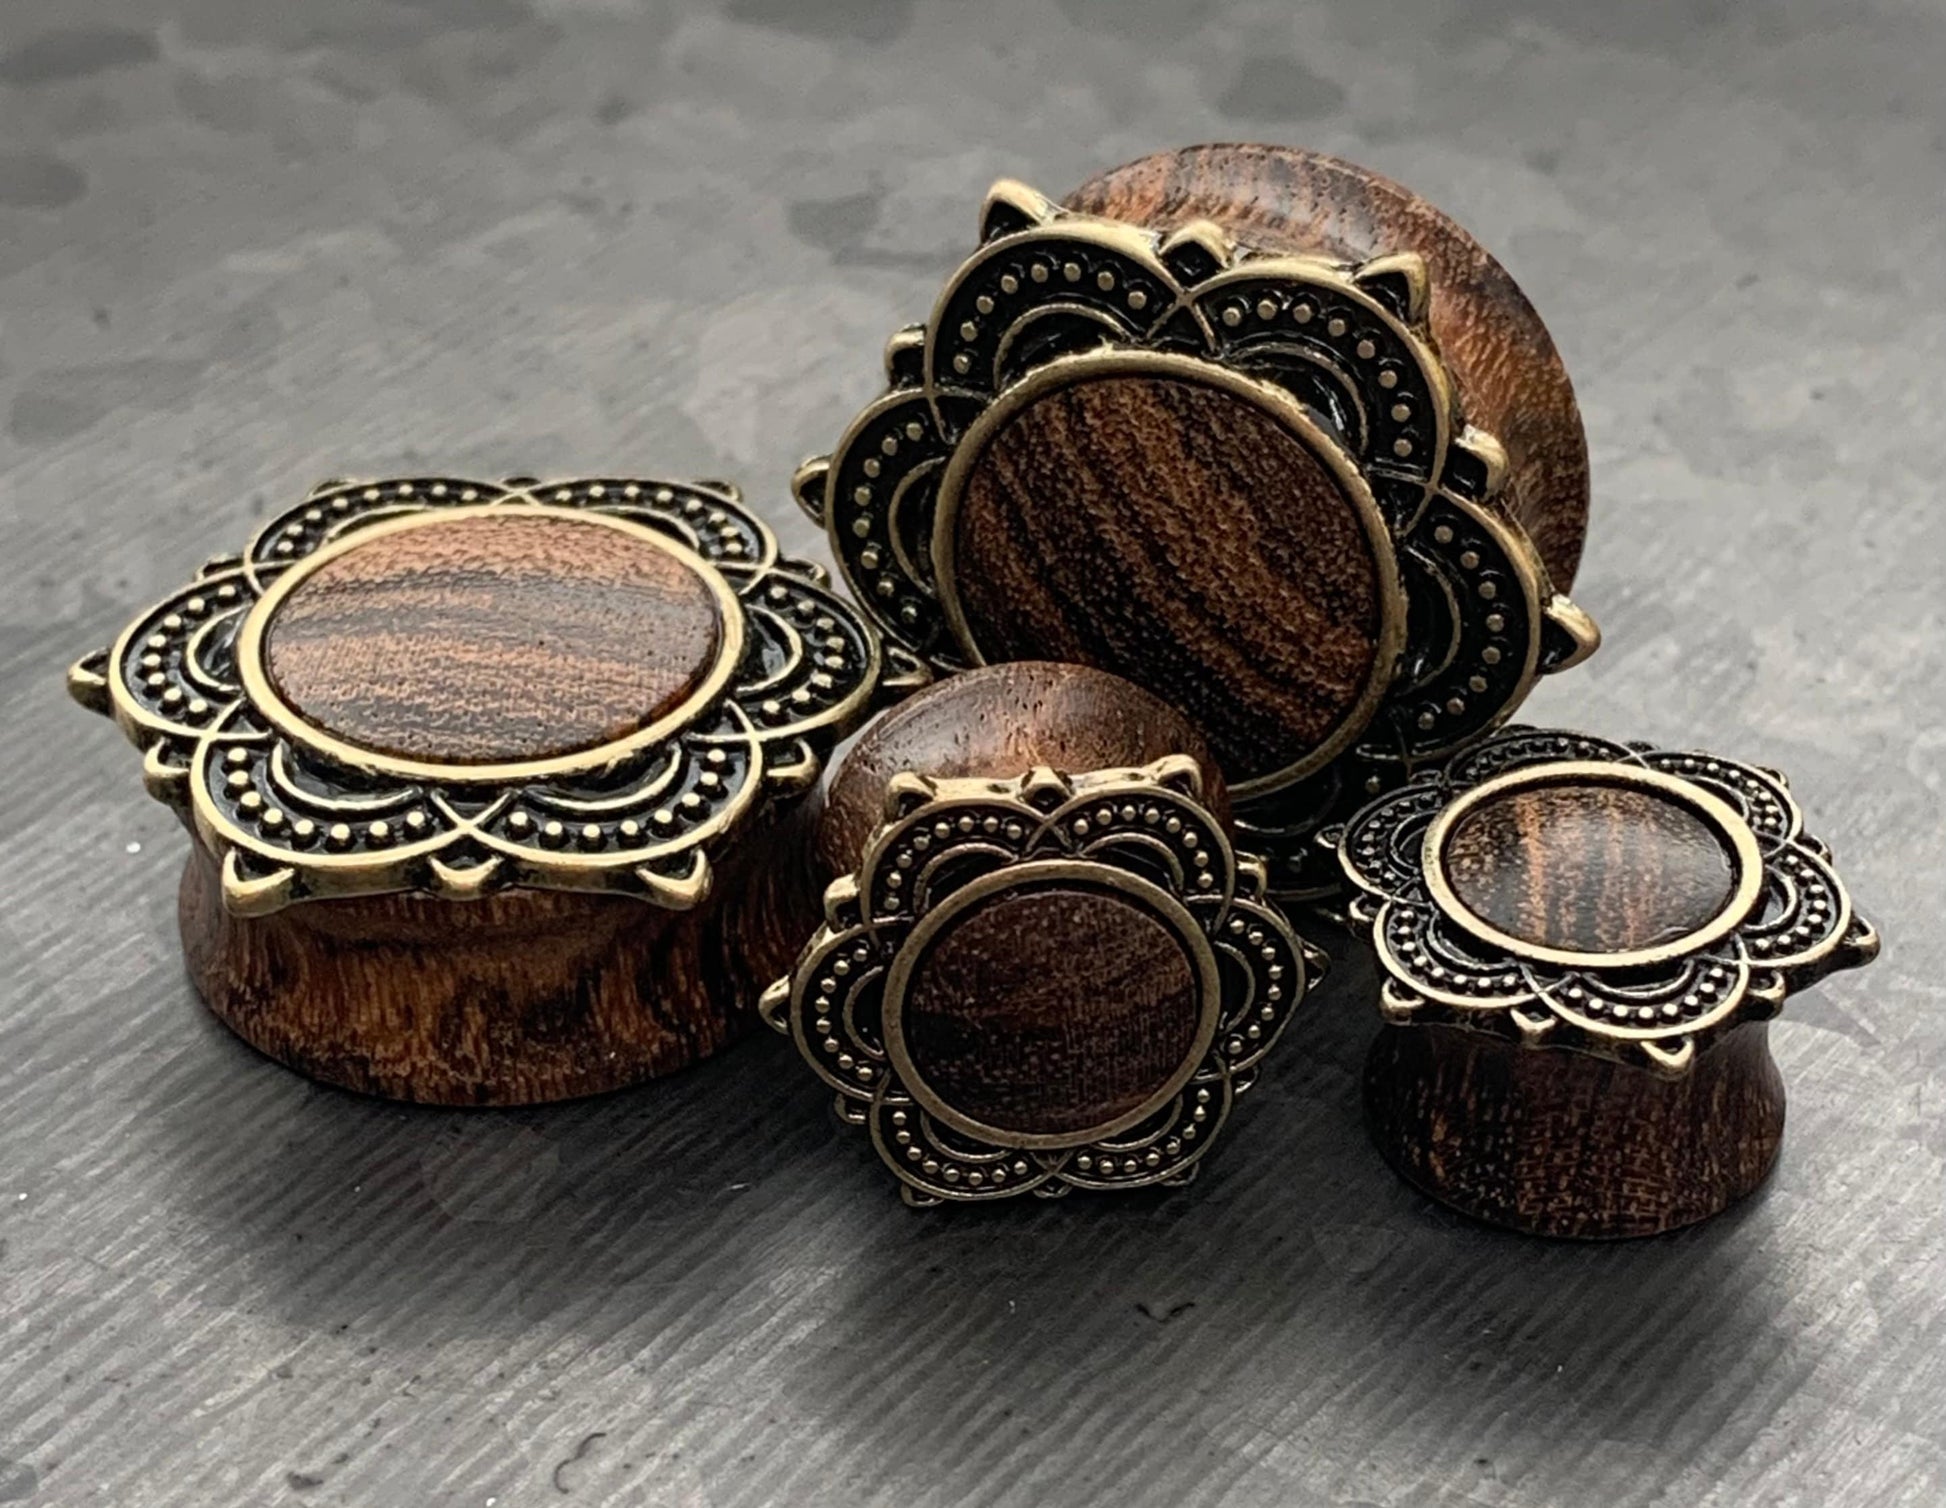 PAIR of Stunning Rose Wood Rose of Sharon Top Saddle Plugs - Gauges 2g (6mm) up to 1" (25mm) available!